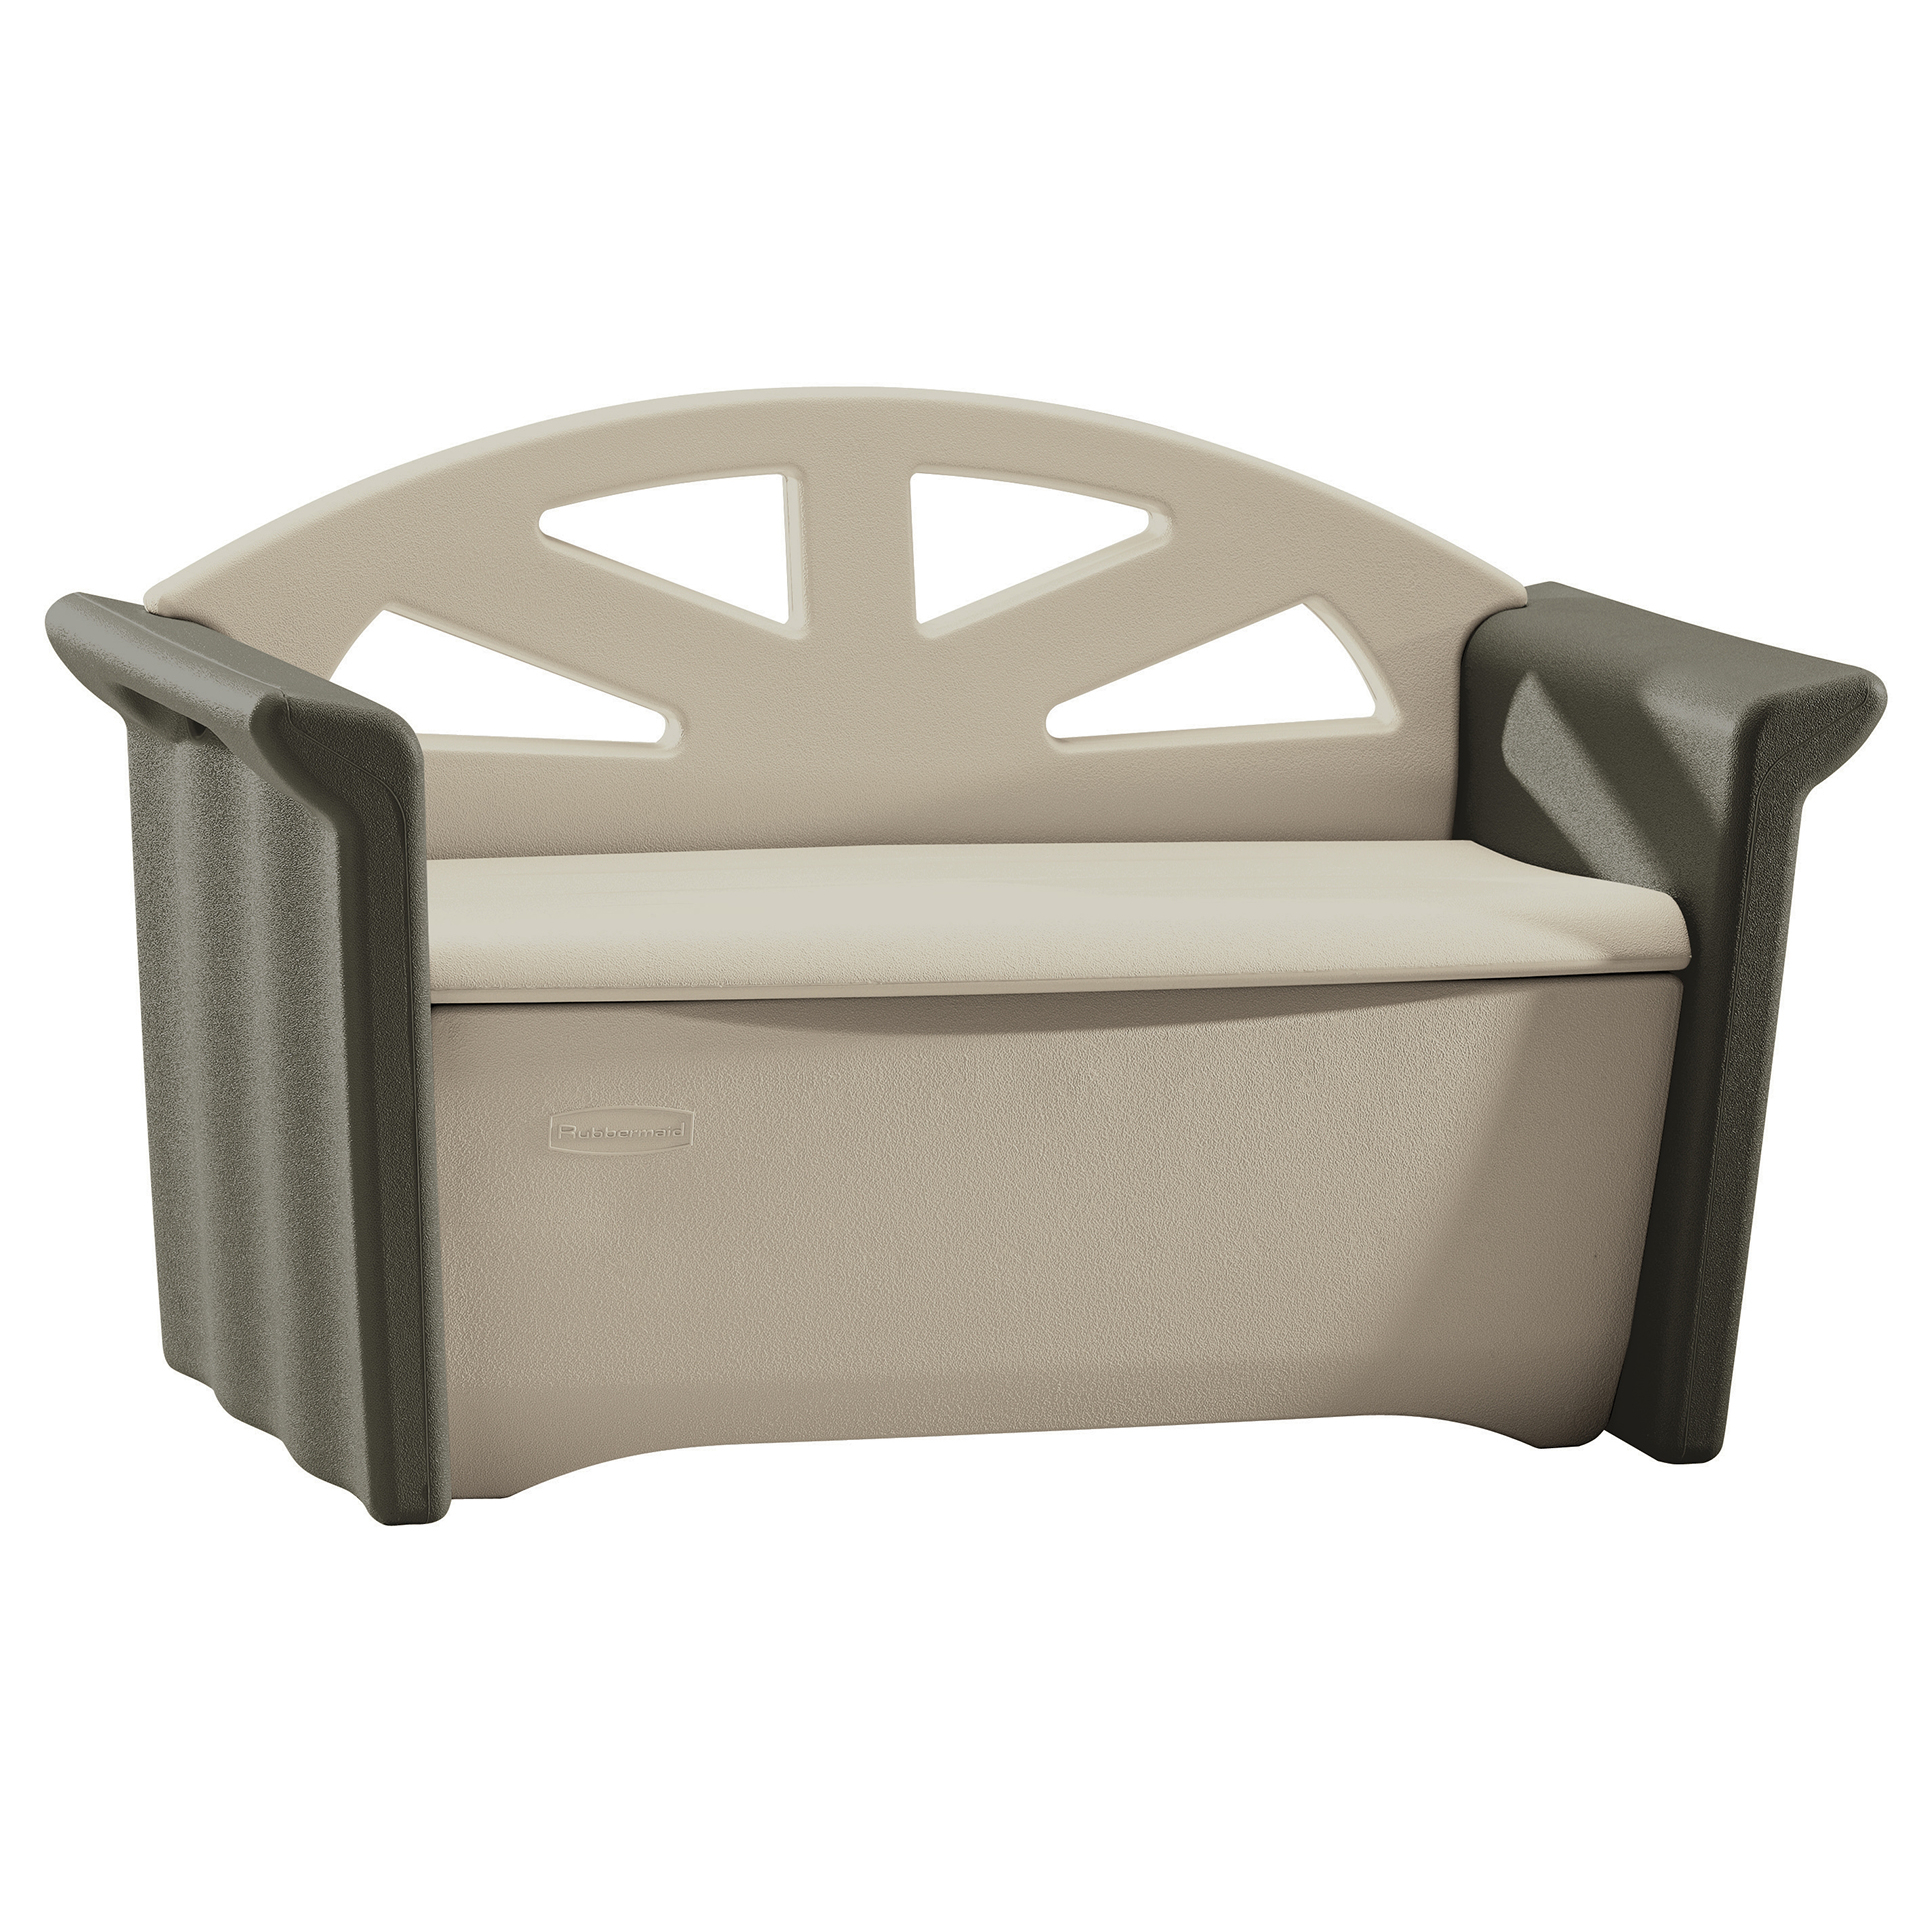 Rubbermaid Outdoor Patio Storage Bench, Resin, Olive & Sandstone - image 4 of 5